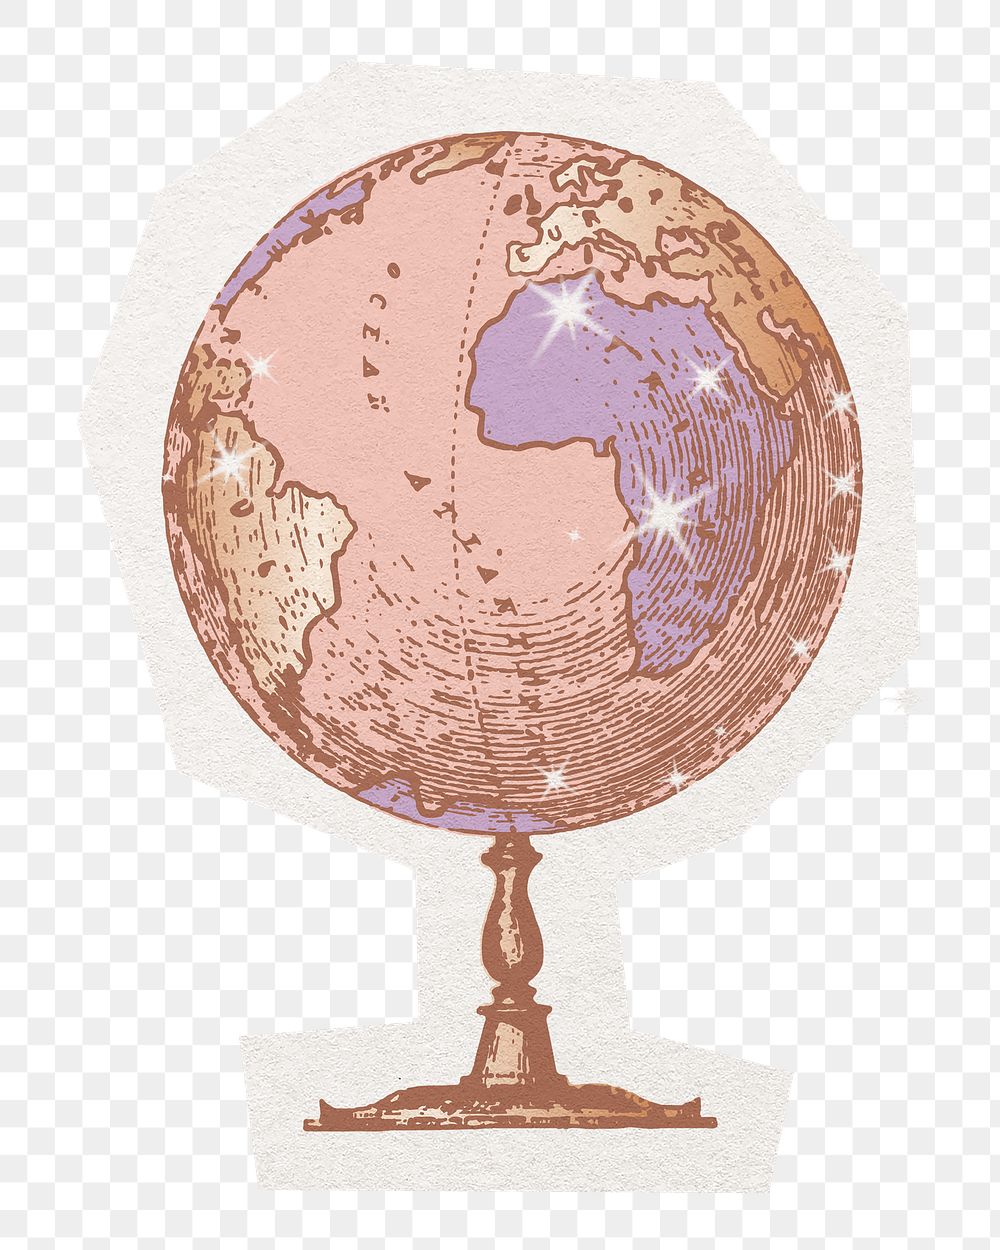 Aesthetic globe png sticker, cut out paper design, transparent background